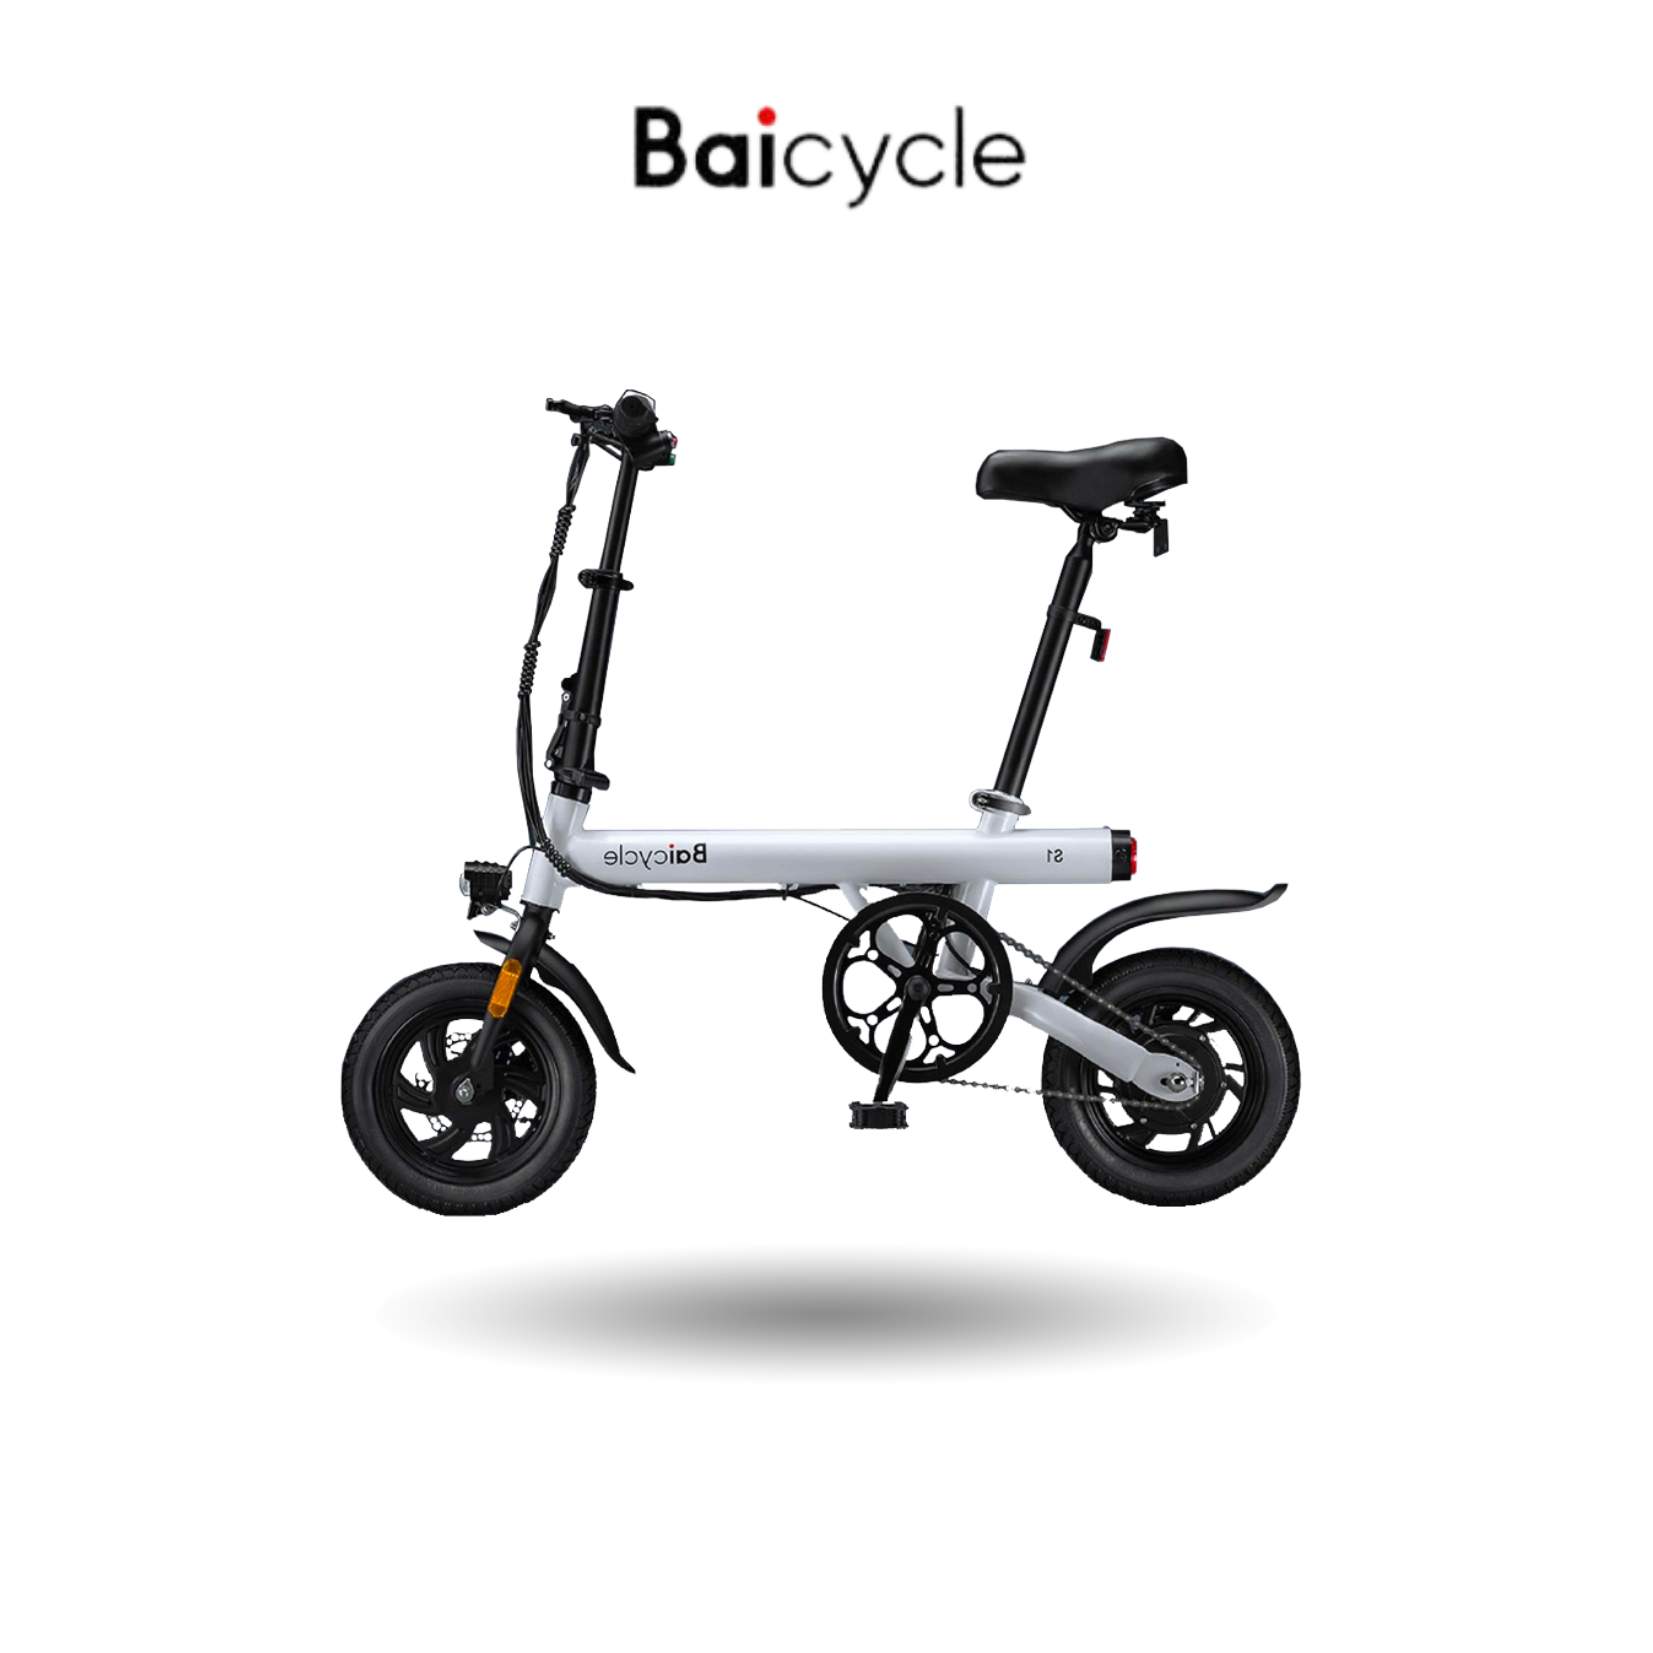 Baicycle Electric Bike S1 | LED Display Screen | DC Brushless Motor | Intelligent BMS System